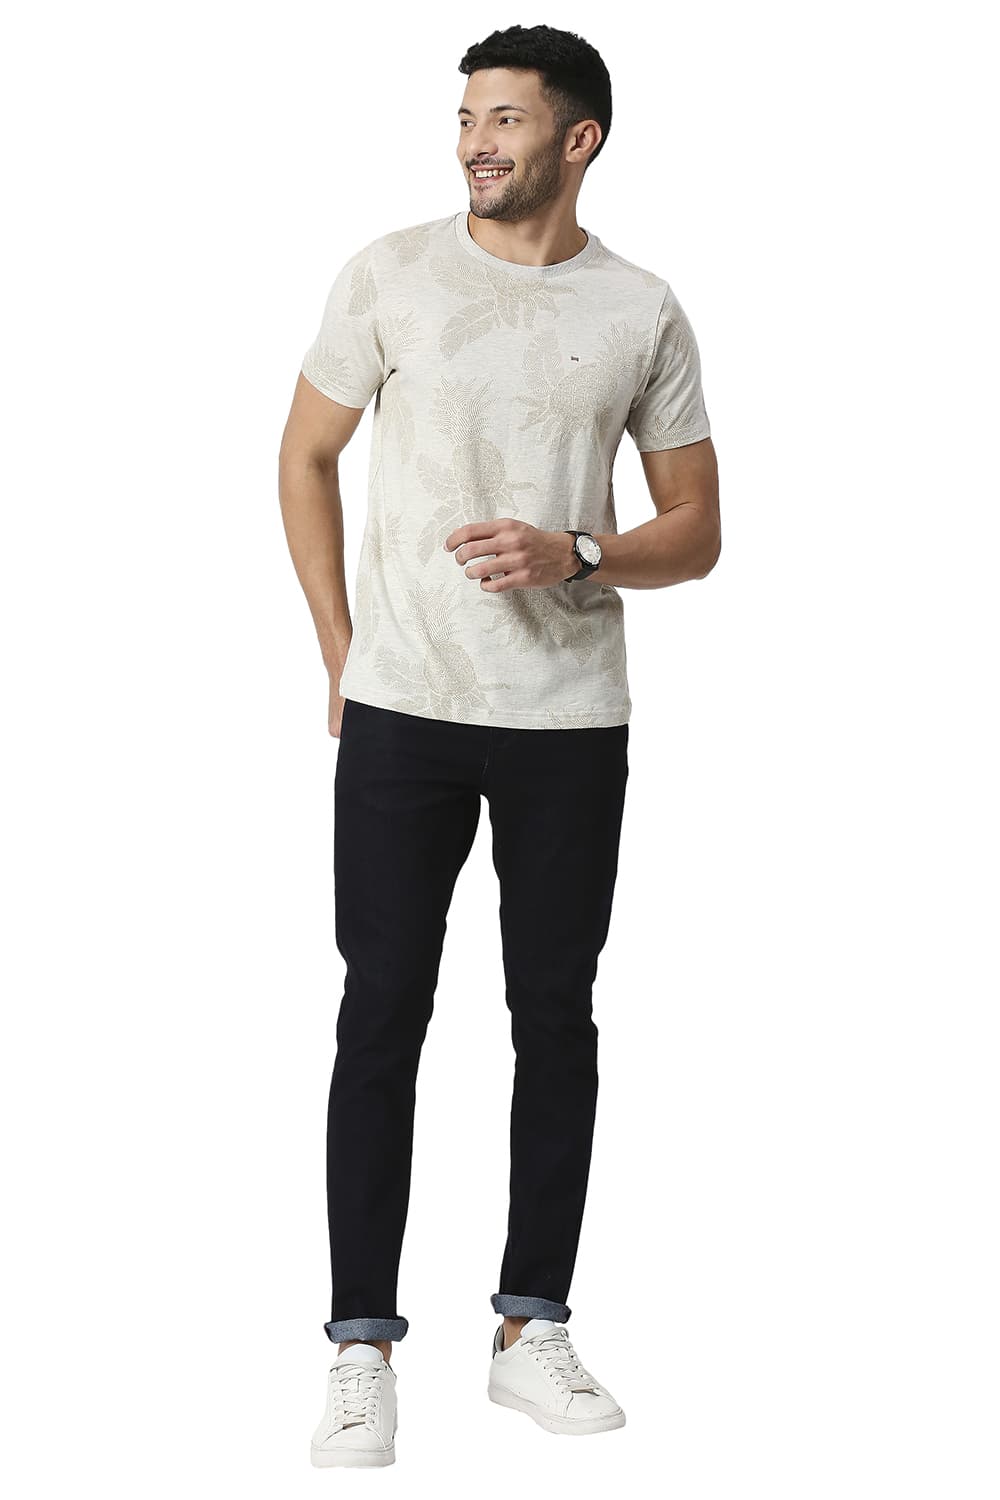 BASICS MUSCLE FIT COTTON POLYESTER CREW T-SHIRT